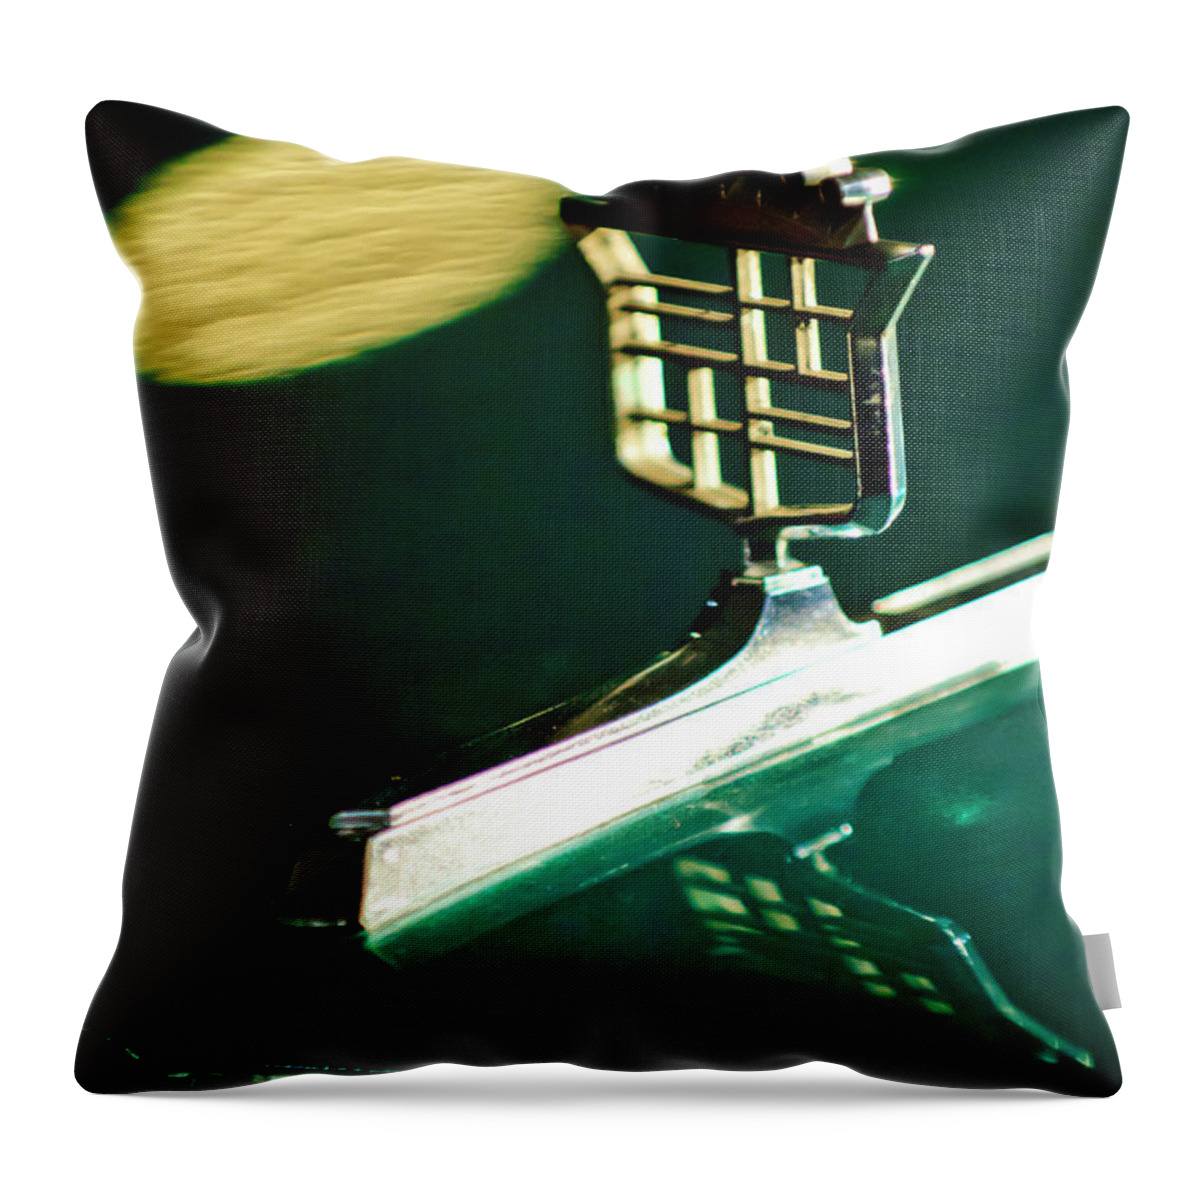 1976 Cadillac Fleetwood Throw Pillow featuring the photograph 1976 Cadillac Fleetwood Hood Ornament by Jill Reger